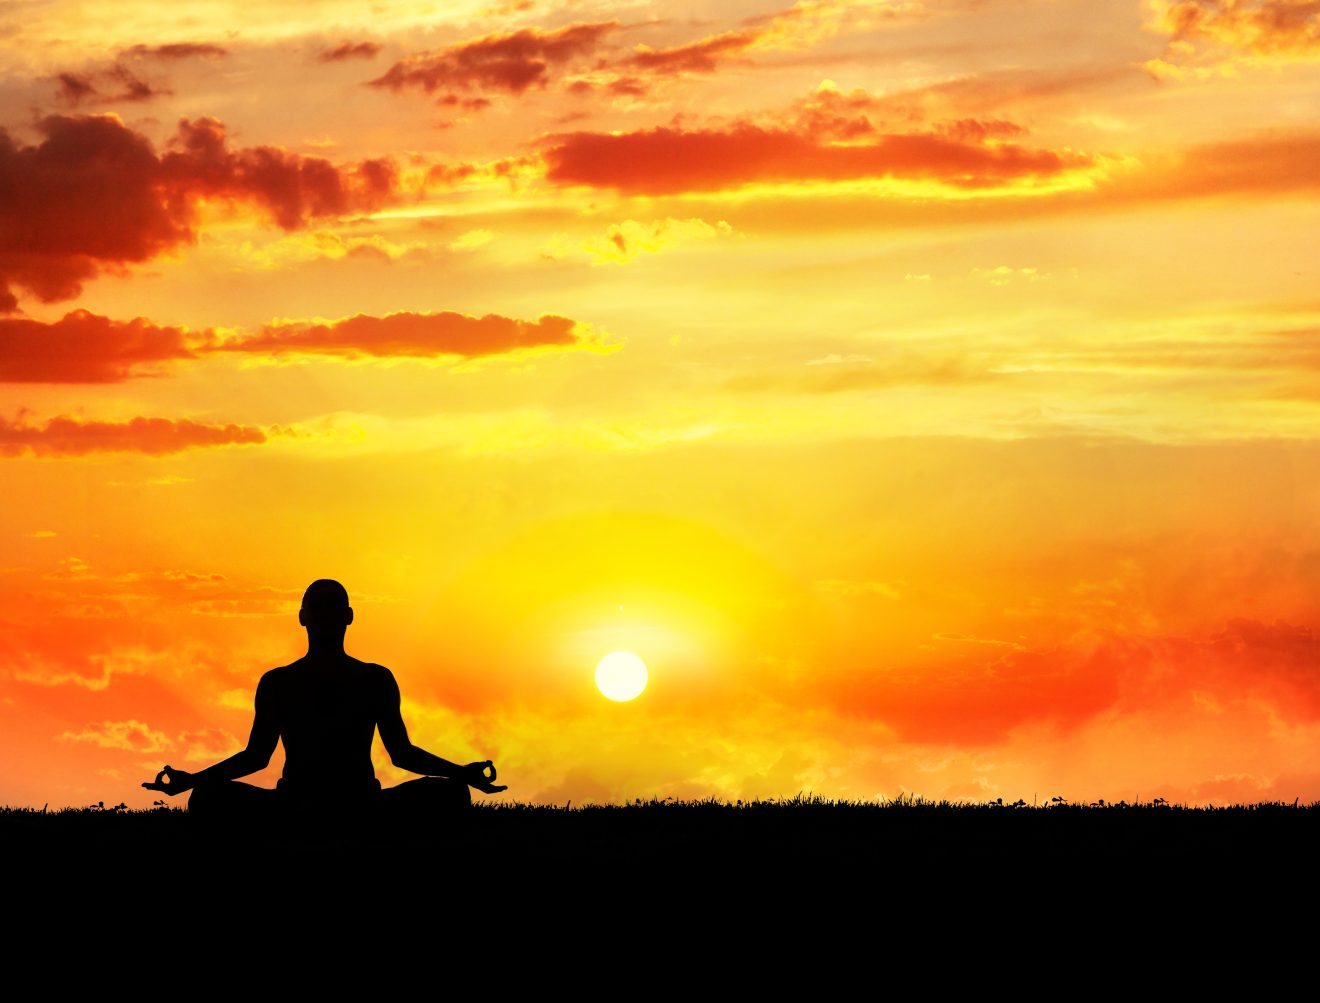 Yoga,Meditation,In,Lotus,Pose,By,Man,Silhouette,At,Sunset